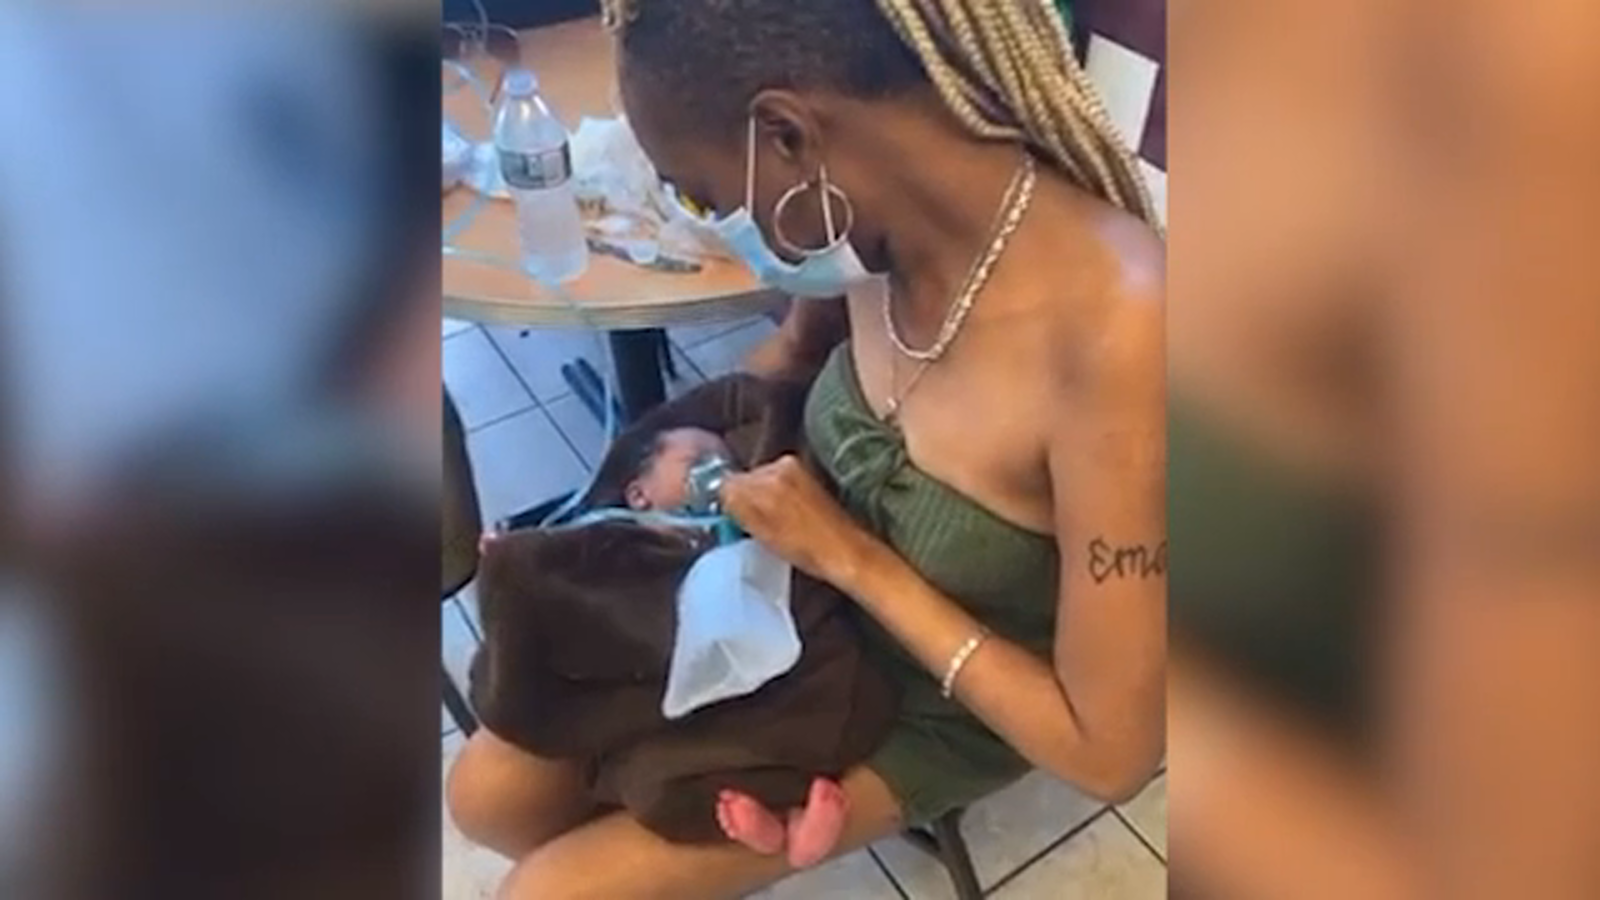 14-year-old gives birth and hands baby to customer at restaurant